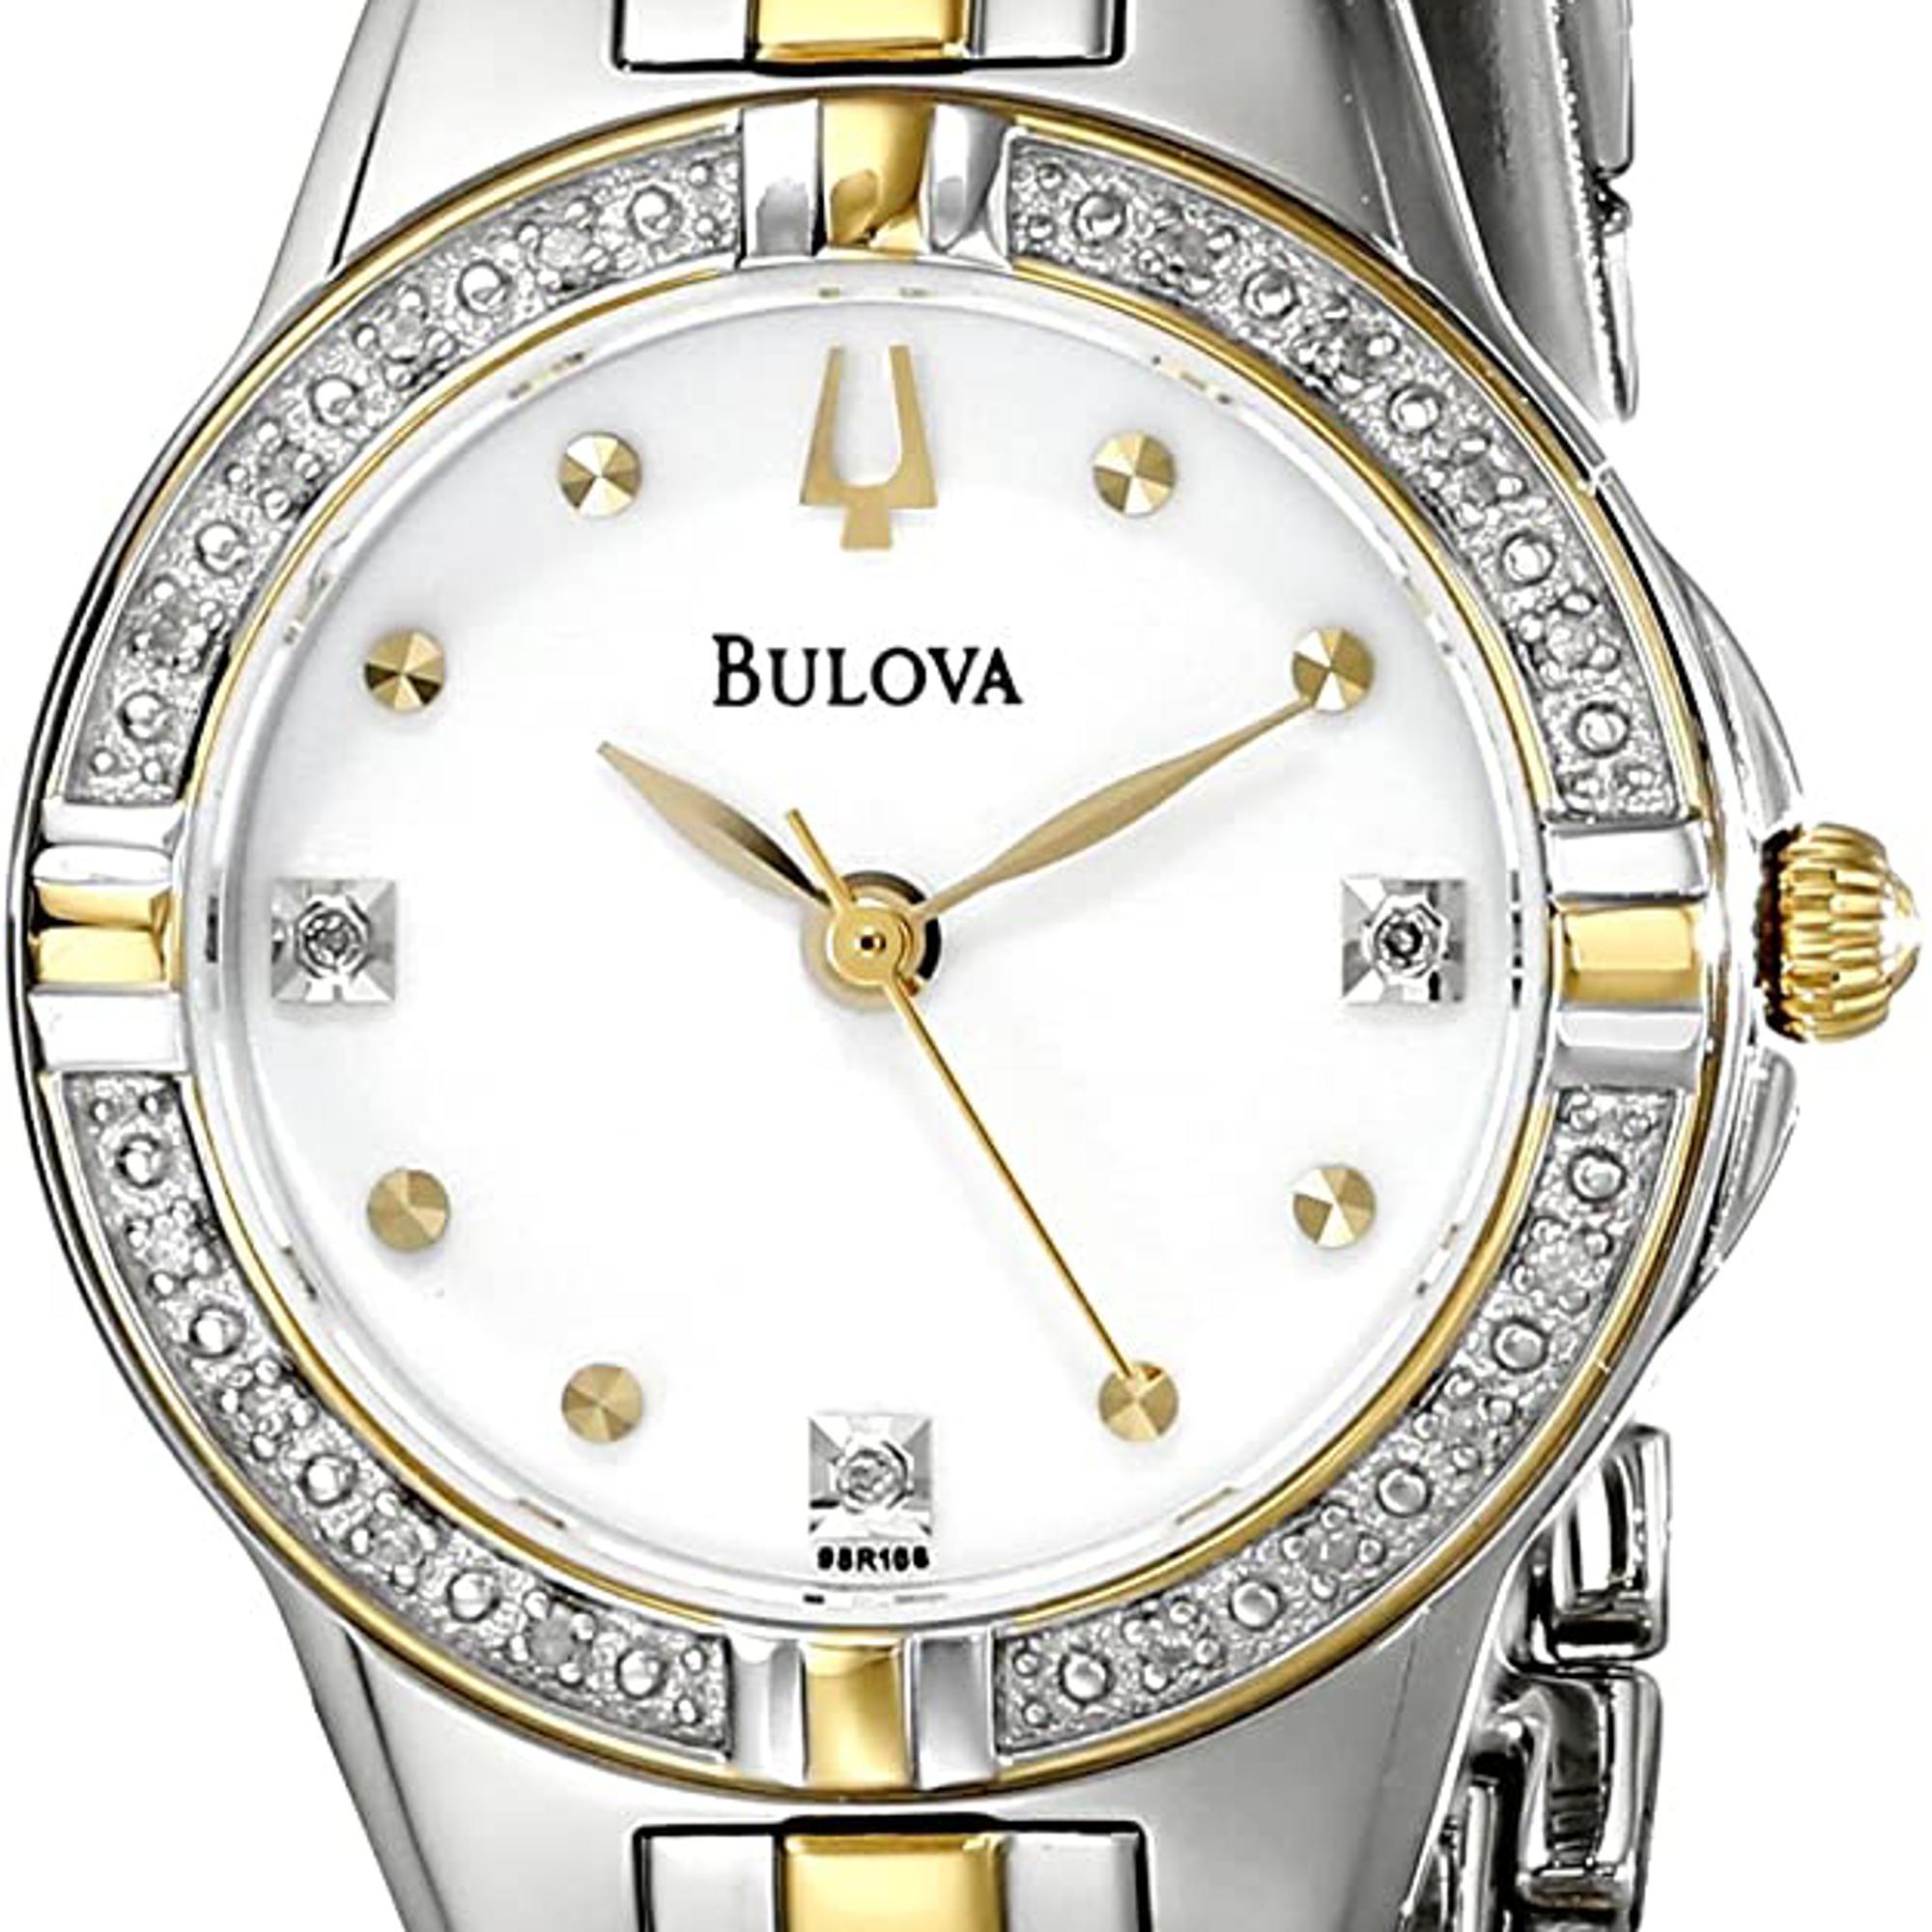 Bulova Diamond Stainless Steel Silver Dial Quartz Ladies Watch 98R166 This Beautiful Timepiece is Powered by a Quartz (Battery) Movement and Features: a Stainless Steel Case and a Two-Tone Bracelet, Fixed Stainless Steel Bezel, a Silver Sunburst